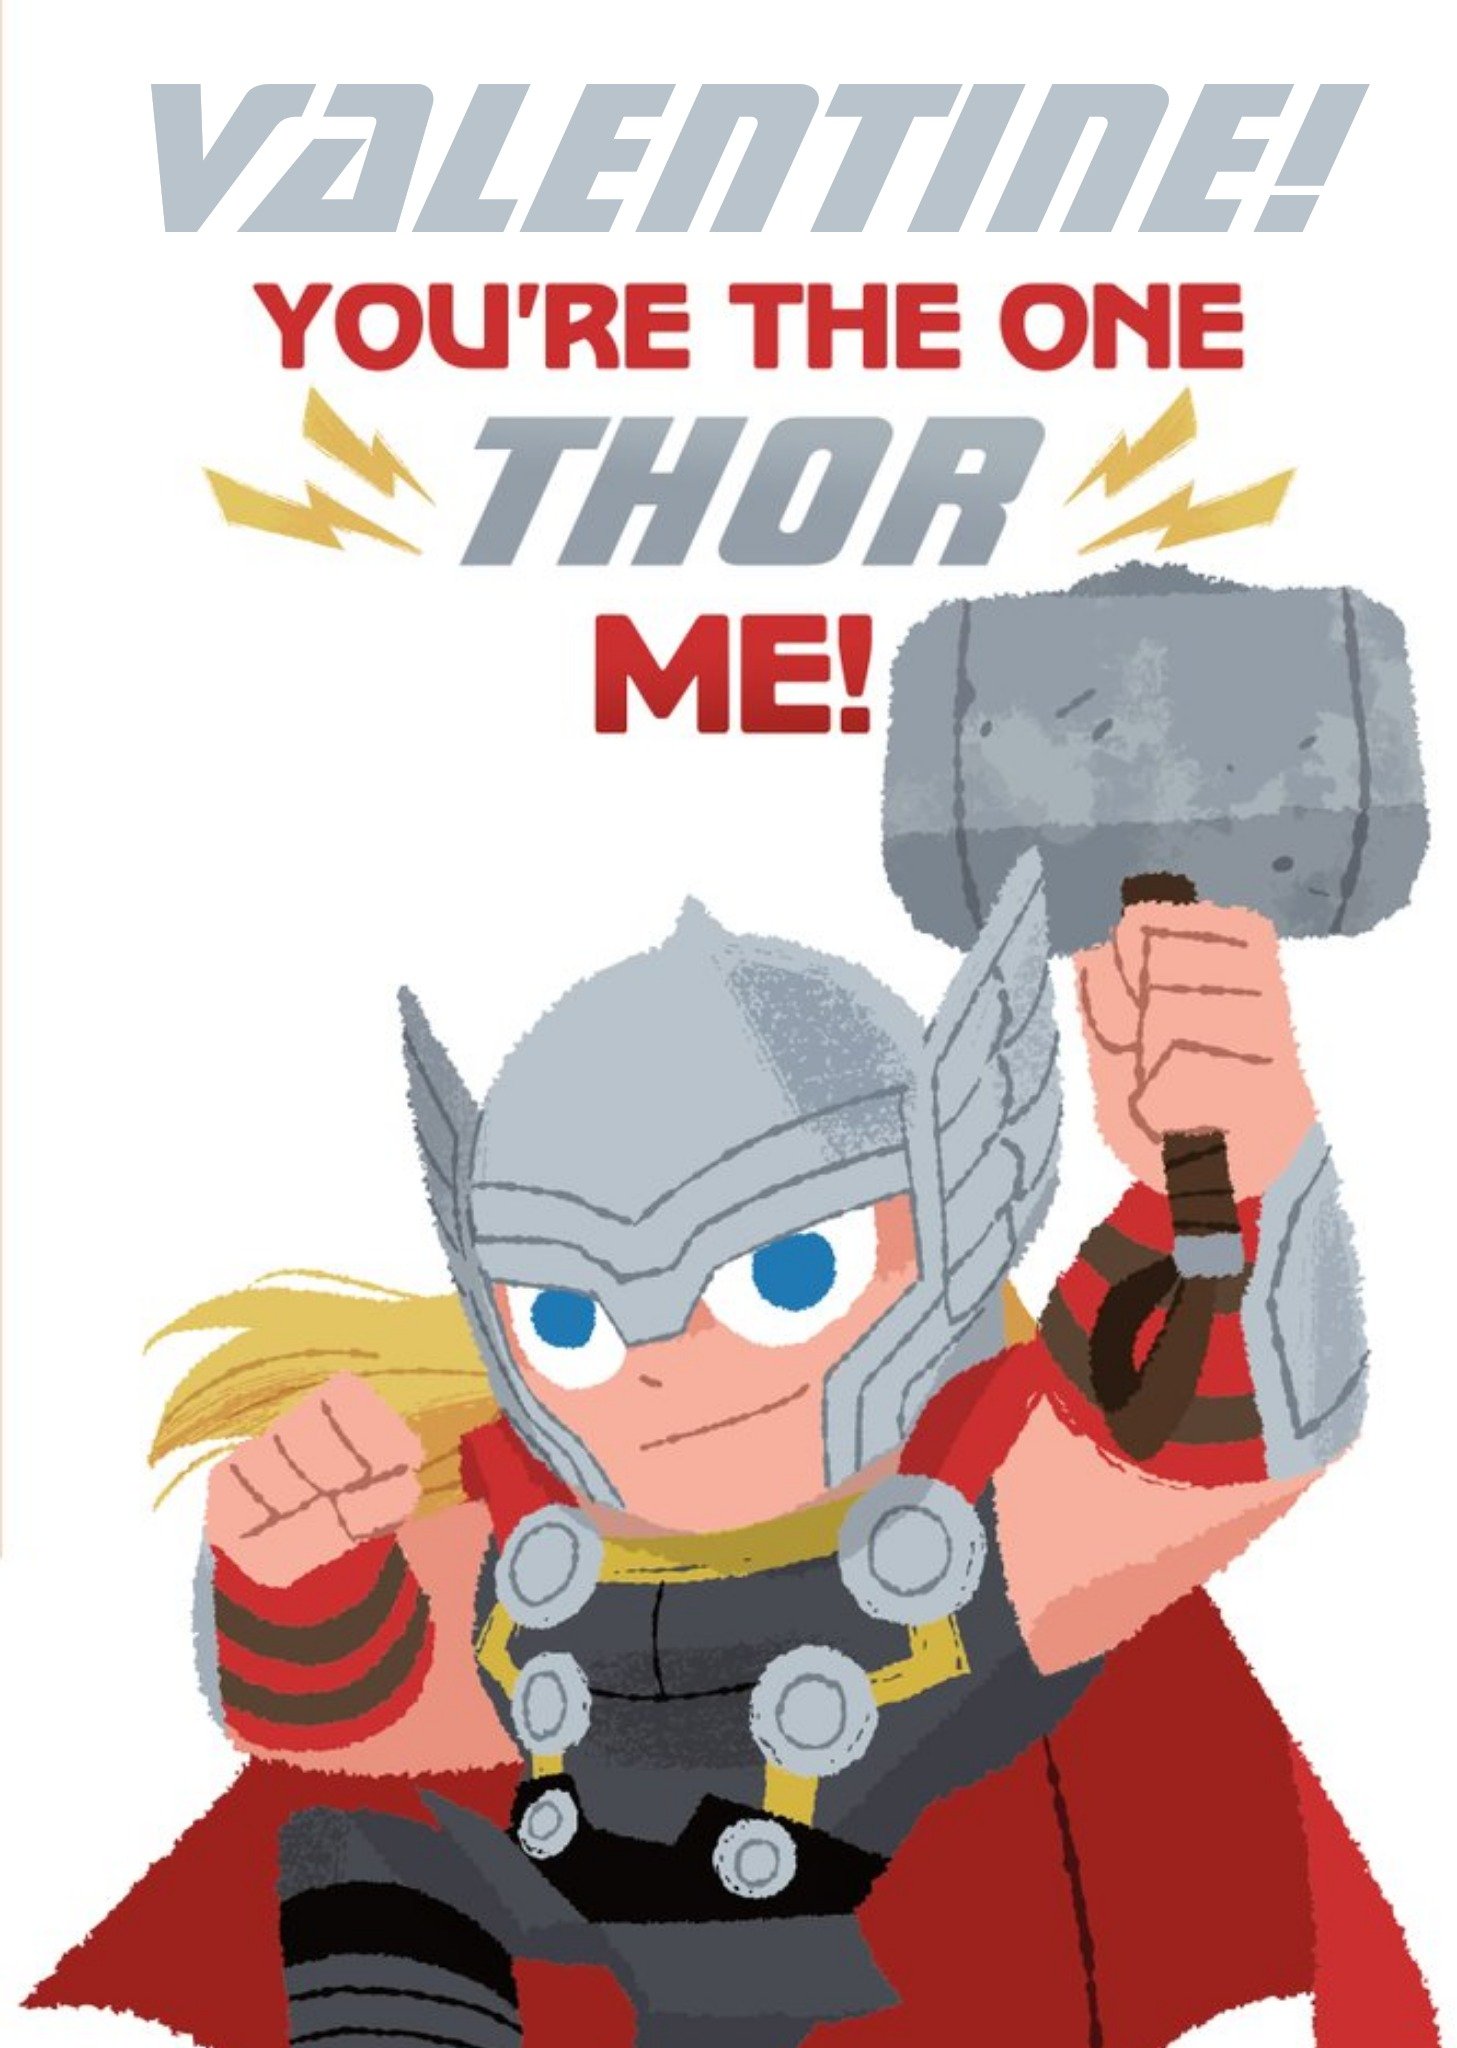 Disney Marvel Comics You're The One Thor Me Valentine's Day Card Ecard